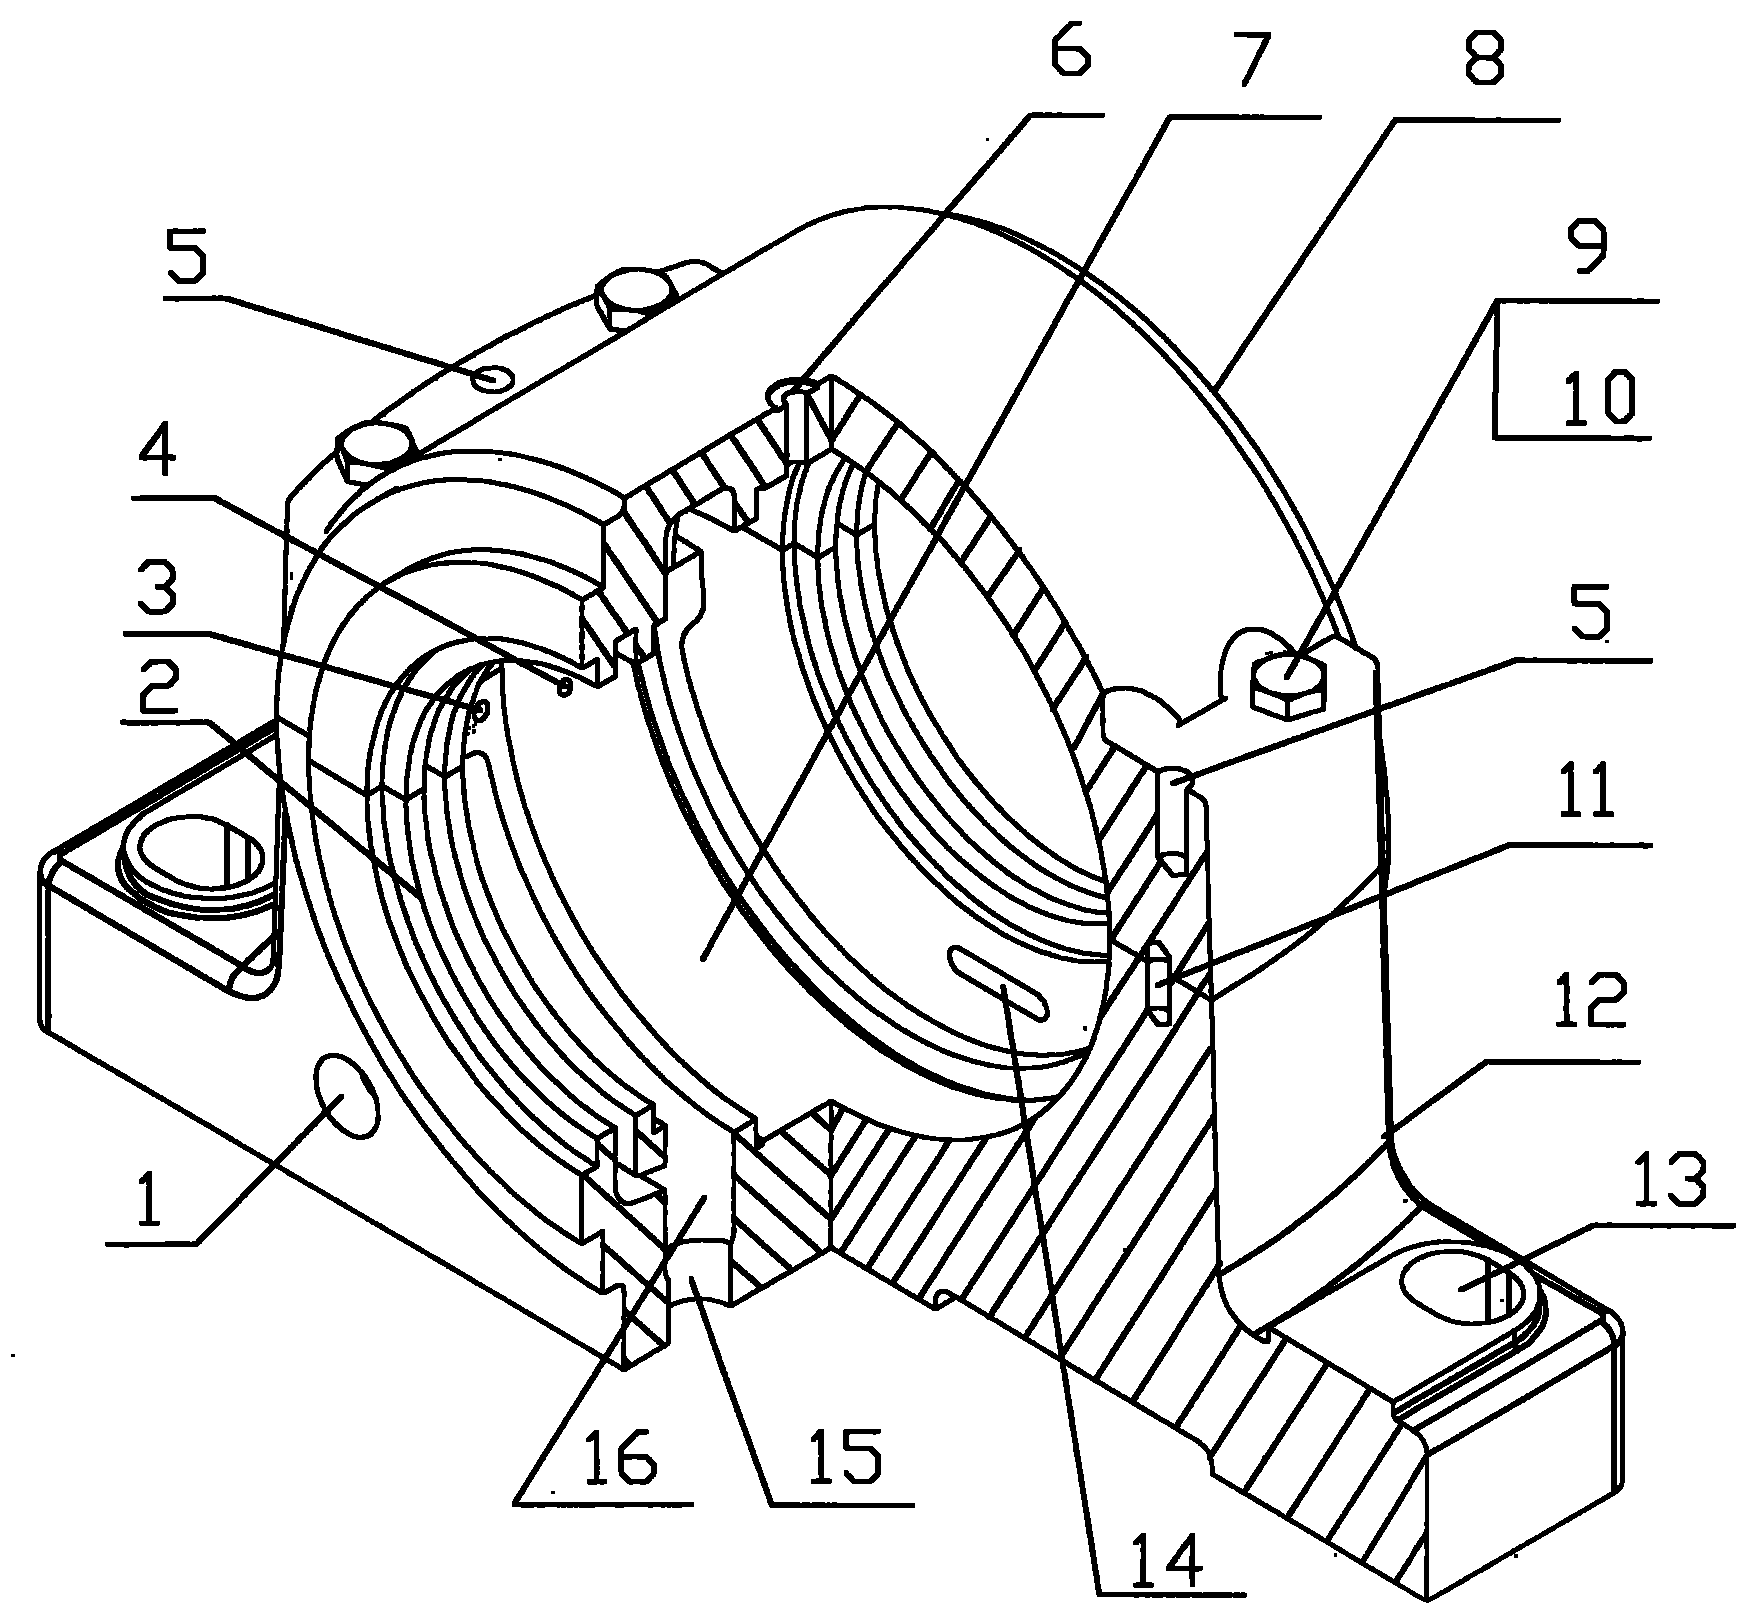 Bearing seat with oil return groove